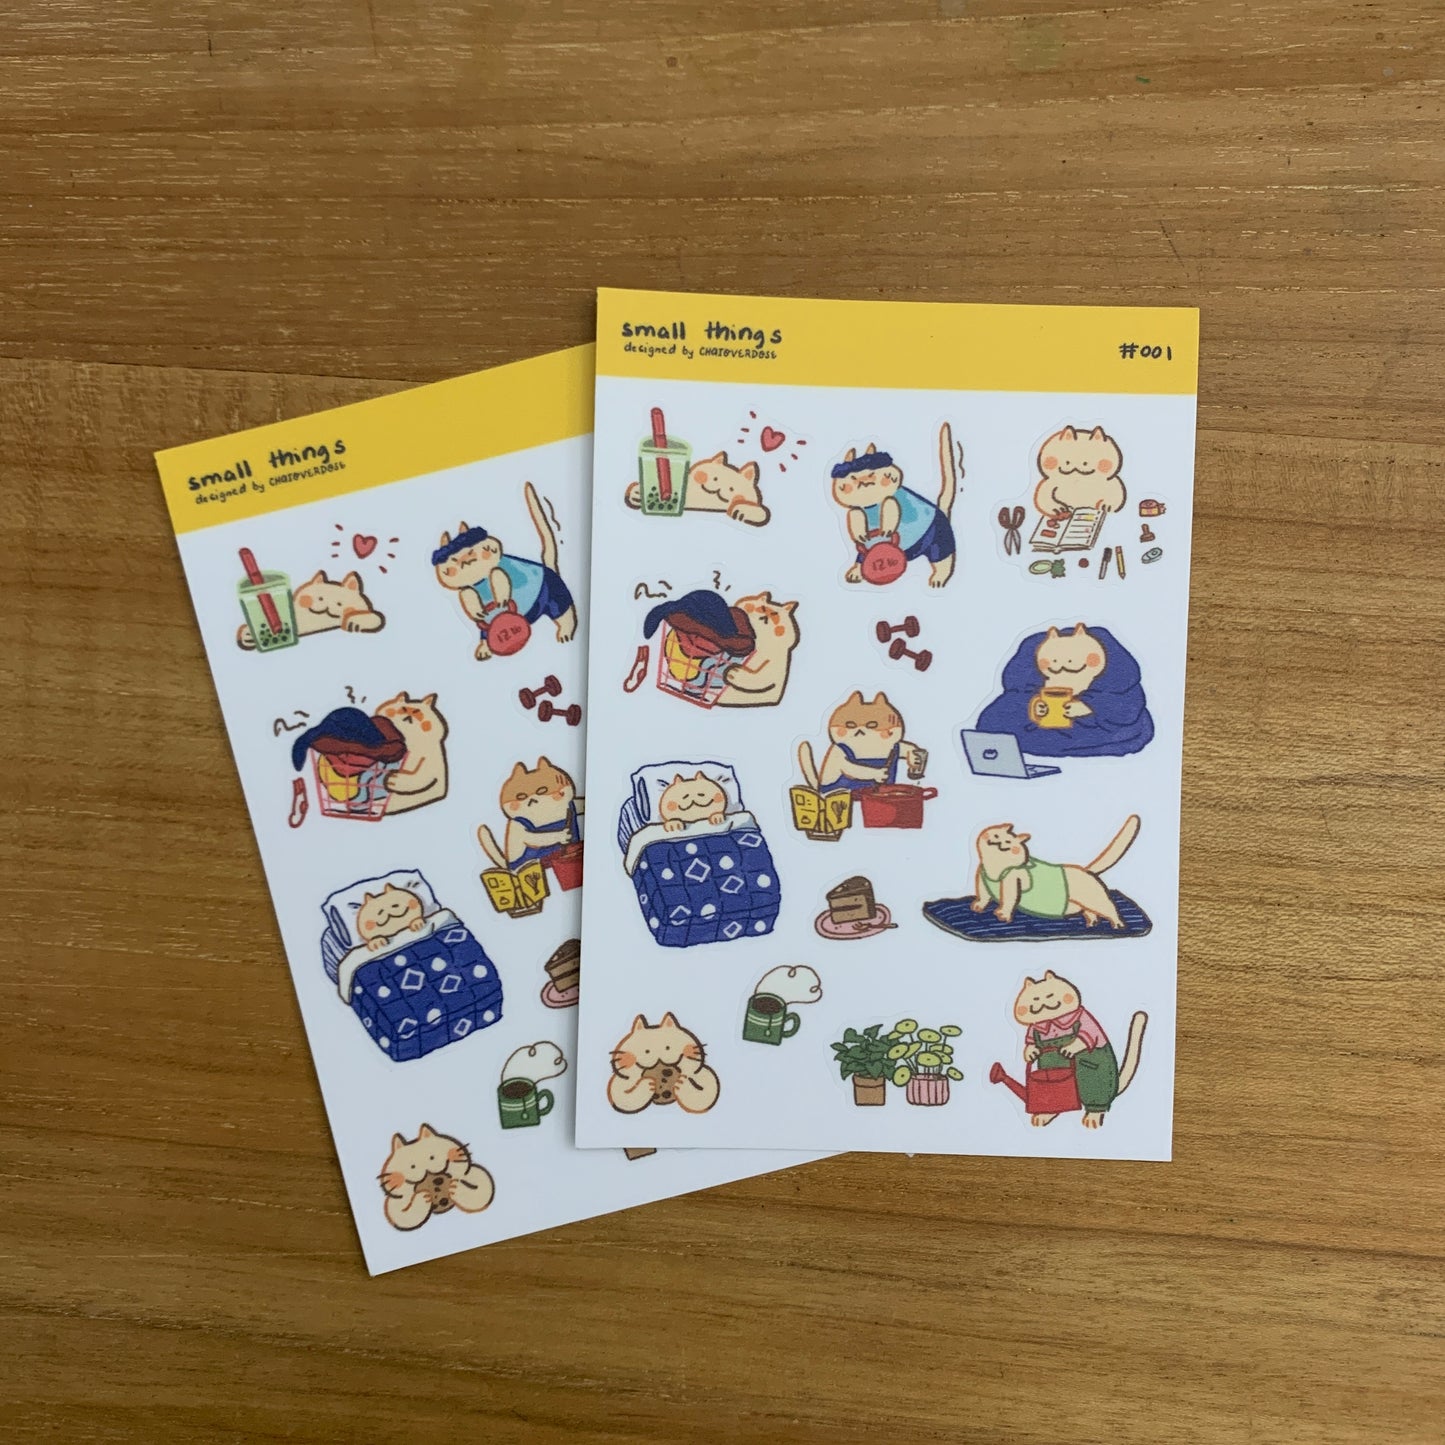 Daily Tasks- Small Things Planner Sticker Sheet #001